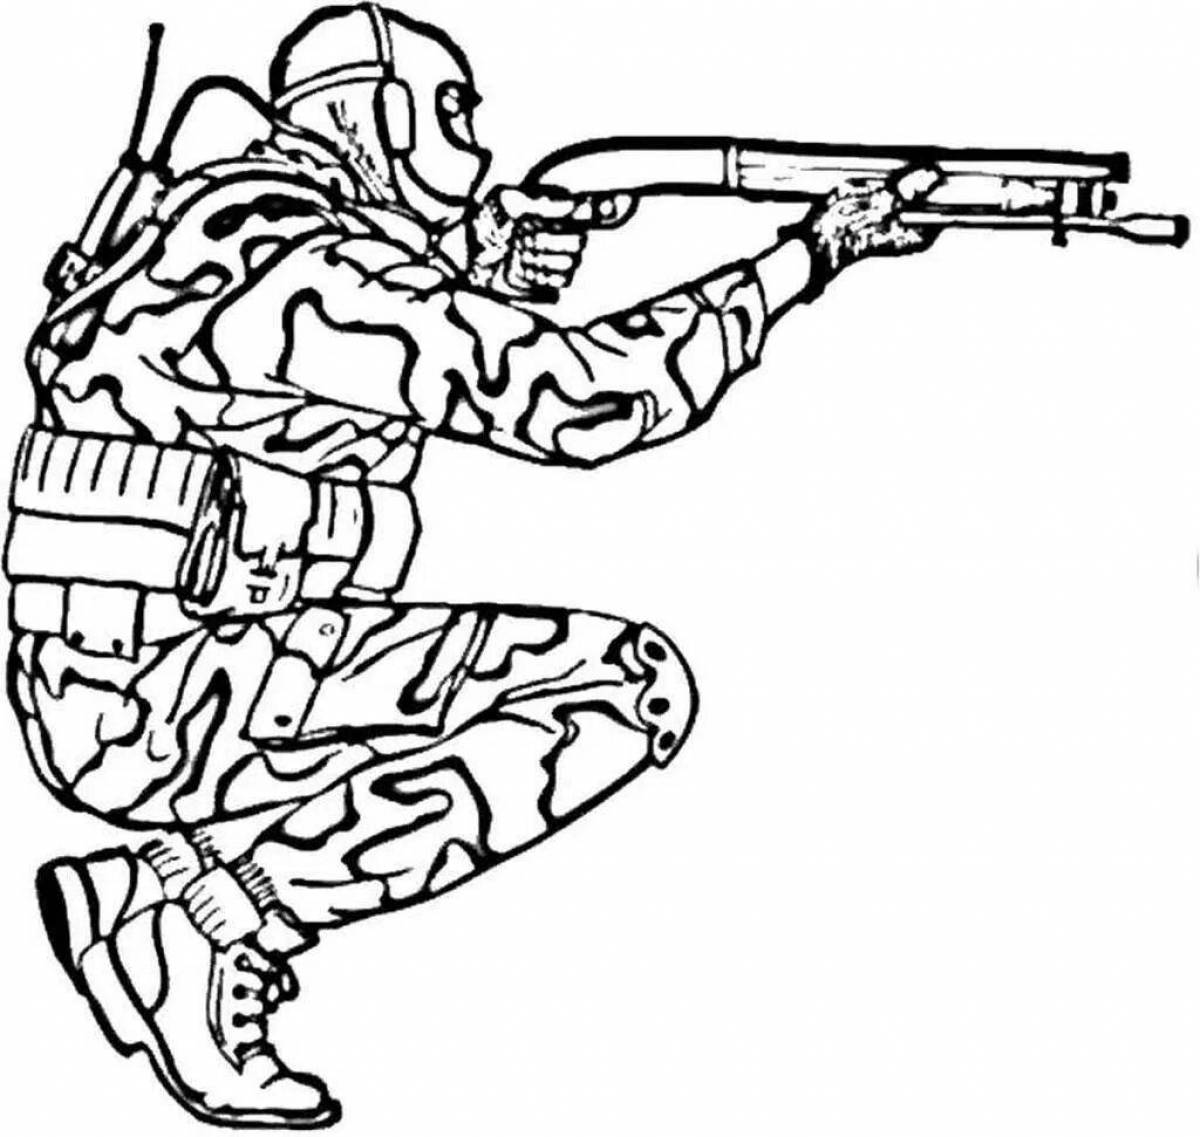 Shock army coloring book for kids